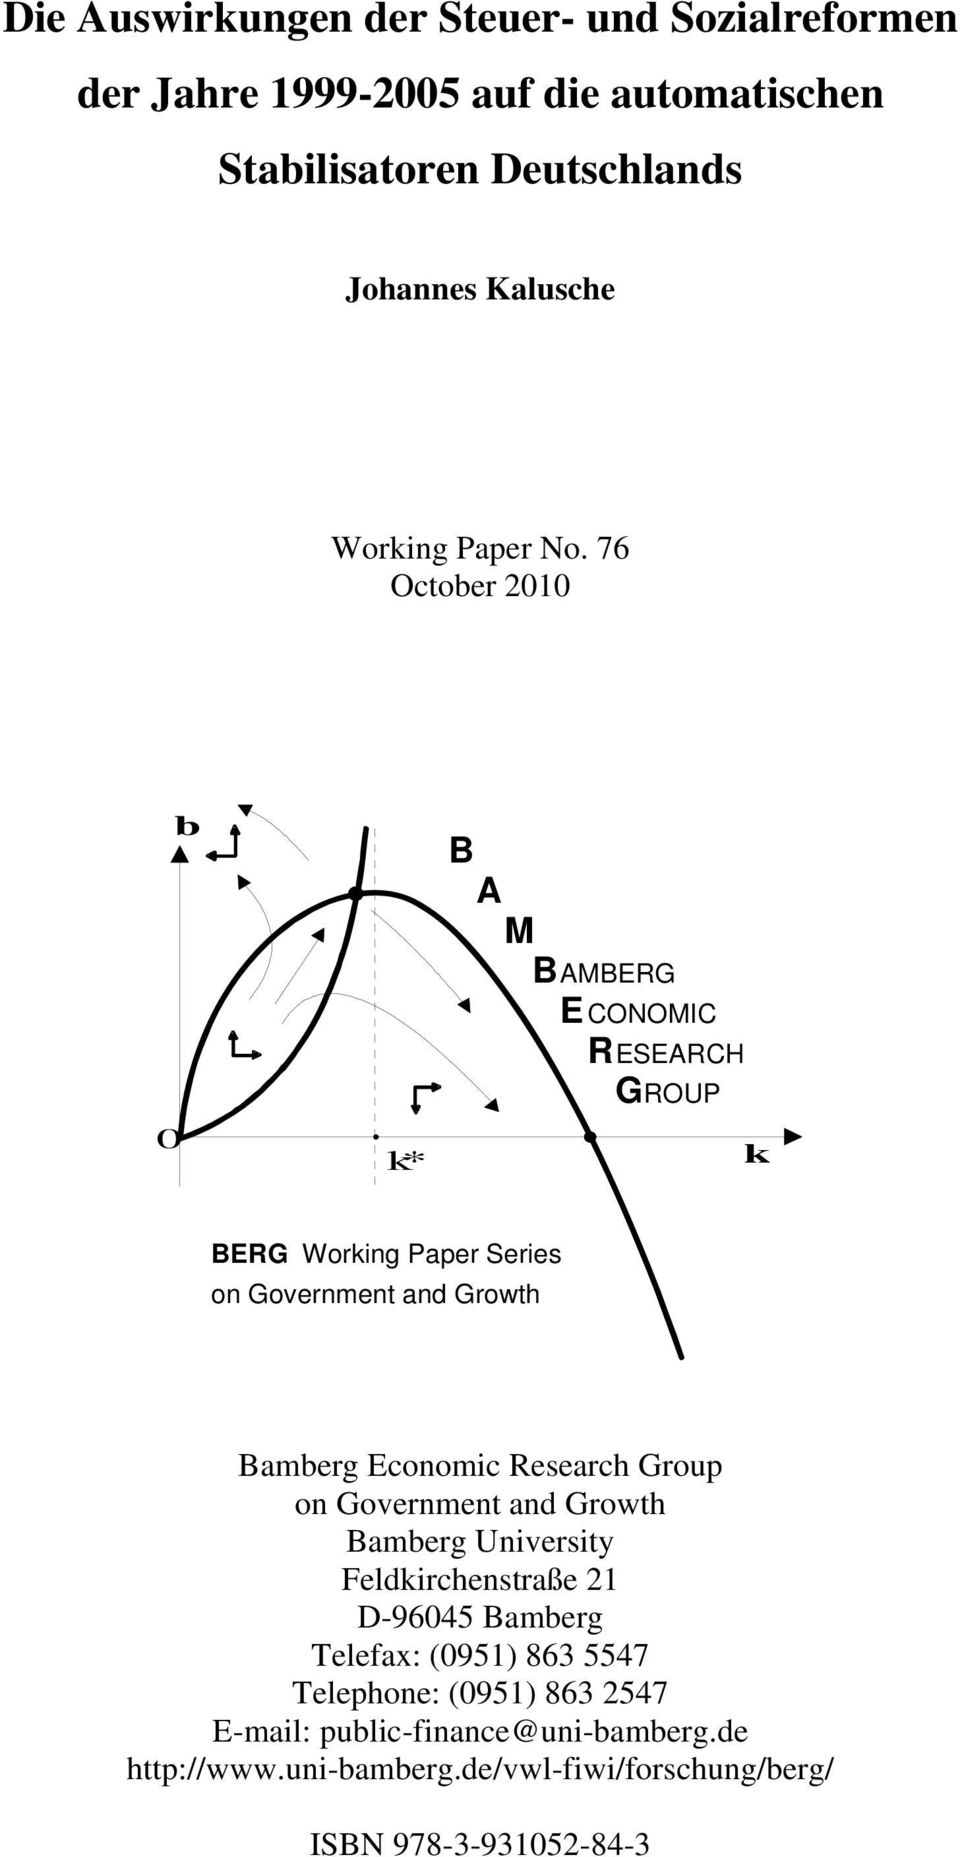 76 October 2010 0 b k* B A M B AMBERG E CONOMIC RESEARCH ROUP G k BERG Working Paper Series on Government and Growth Bamberg Economic